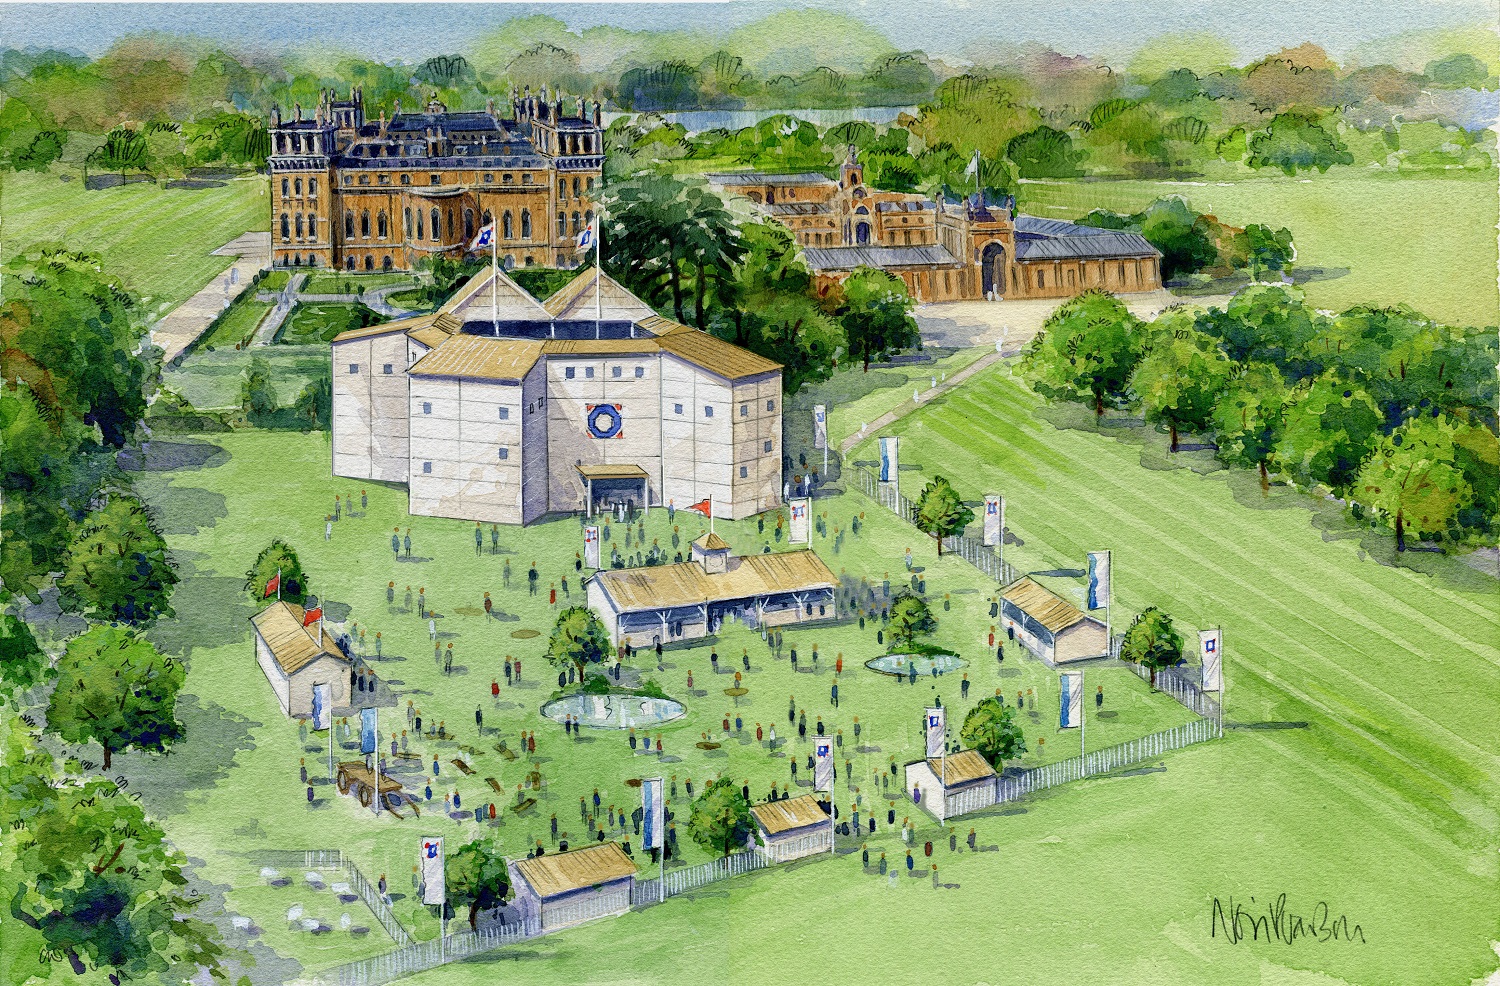 Shakespeare's Rose Theatre at Blenheim Palace. Illustration by Neil Pearson sml